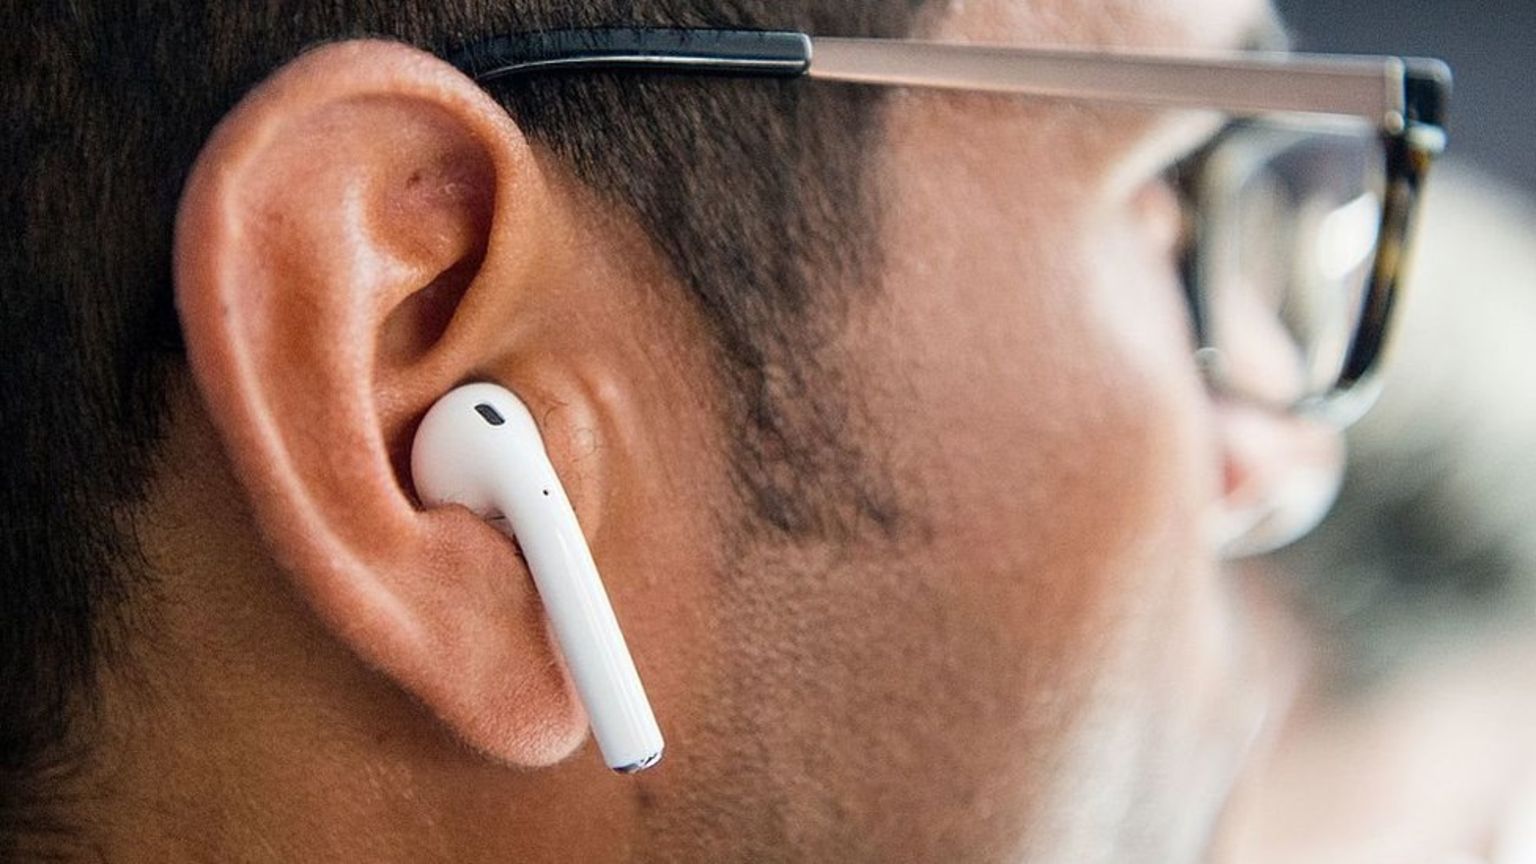 Apple will charge £65 to replace one lost Airpod